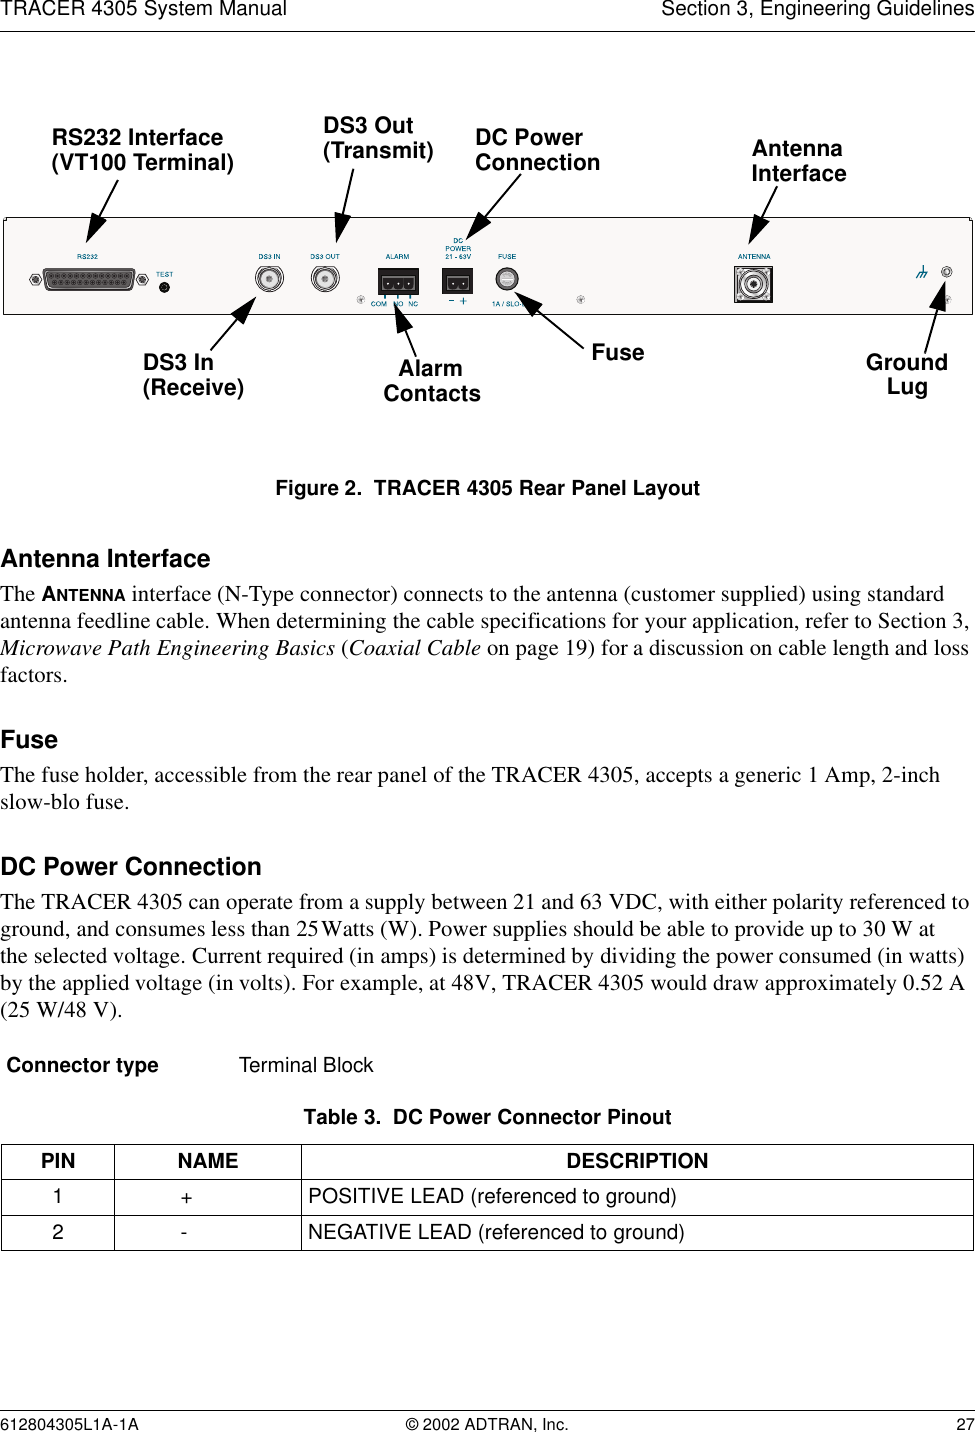 TRACER 4305 System Manual Section 3, Engineering Guidelines612804305L1A-1A © 2002 ADTRAN, Inc. 27Figure 2.  TRACER 4305 Rear Panel LayoutAntenna InterfaceThe ANTENNA interface (N-Type connector) connects to the antenna (customer supplied) using standard antenna feedline cable. When determining the cable specifications for your application, refer to Section 3, Microwave Path Engineering Basics (Coaxial Cable on page 19) for a discussion on cable length and loss factors.FuseThe fuse holder, accessible from the rear panel of the TRACER 4305, accepts a generic 1 Amp, 2-inch slow-blo fuse.DC Power ConnectionThe TRACER 4305 can operate from a supply between 21 and 63 VDC, with either polarity referenced to ground, and consumes less than 25 Watts (W). Power supplies should be able to provide up to 30 W atthe selected voltage. Current required (in amps) is determined by dividing the power consumed (in watts) by the applied voltage (in volts). For example, at 48 V, TRACER 4305 would draw approximately 0.52 A (25 W/48 V).Connector type Terminal BlockTable 3.  DC Power Connector PinoutPIN NAME DESCRIPTION1 + POSITIVE LEAD (referenced to ground)2 - NEGATIVE LEAD (referenced to ground)AntennaDC PowerConnection InterfaceDS3 Out(Transmit)DS3 In(Receive)RS232 Interface(VT100 Terminal)GroundLugFuseAlarmContacts